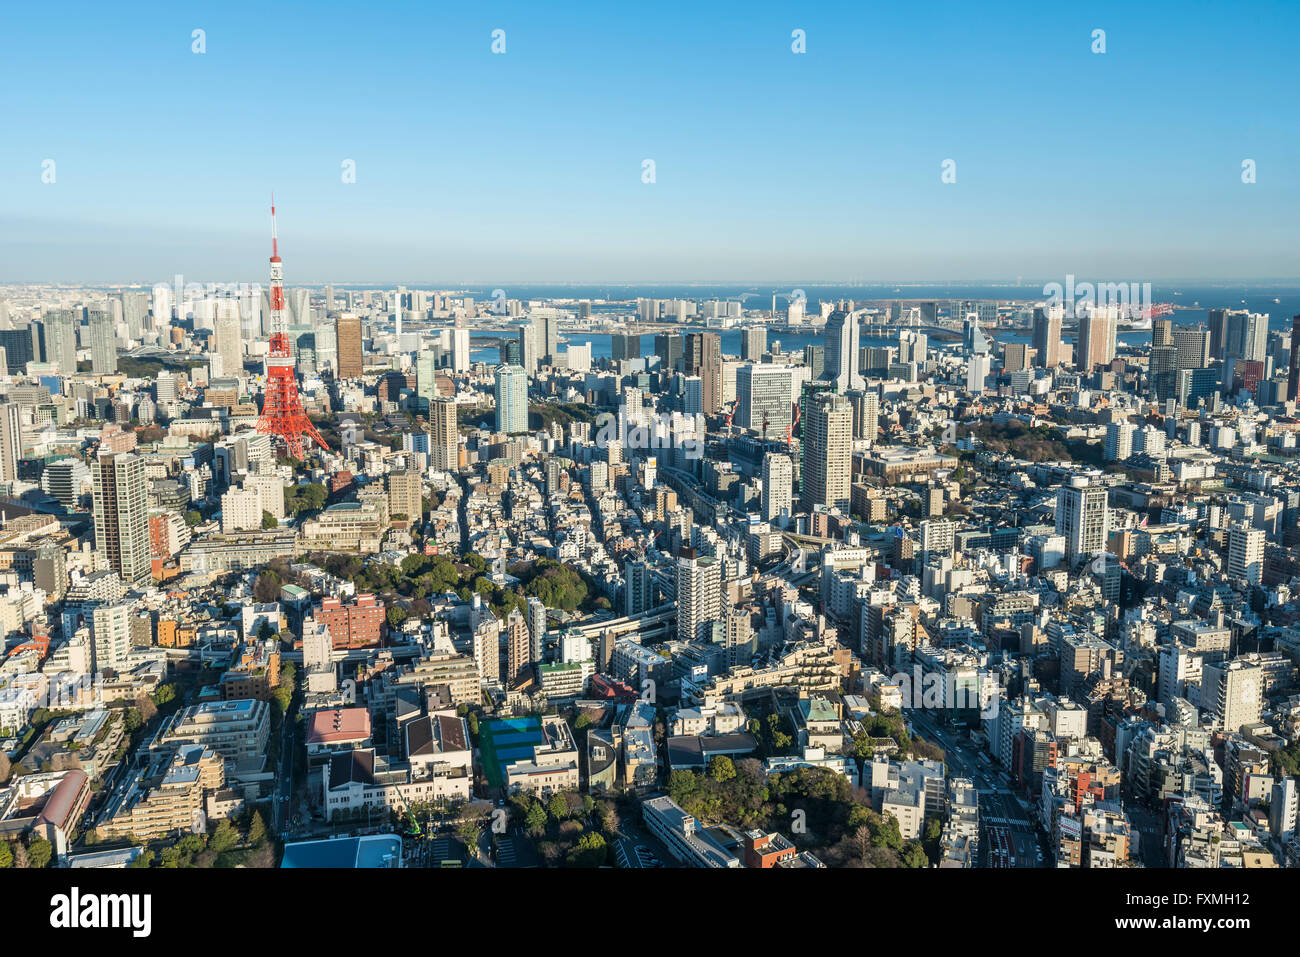 Tokyo tower and high rise buildings in Tokyo, Japan Stock Photo